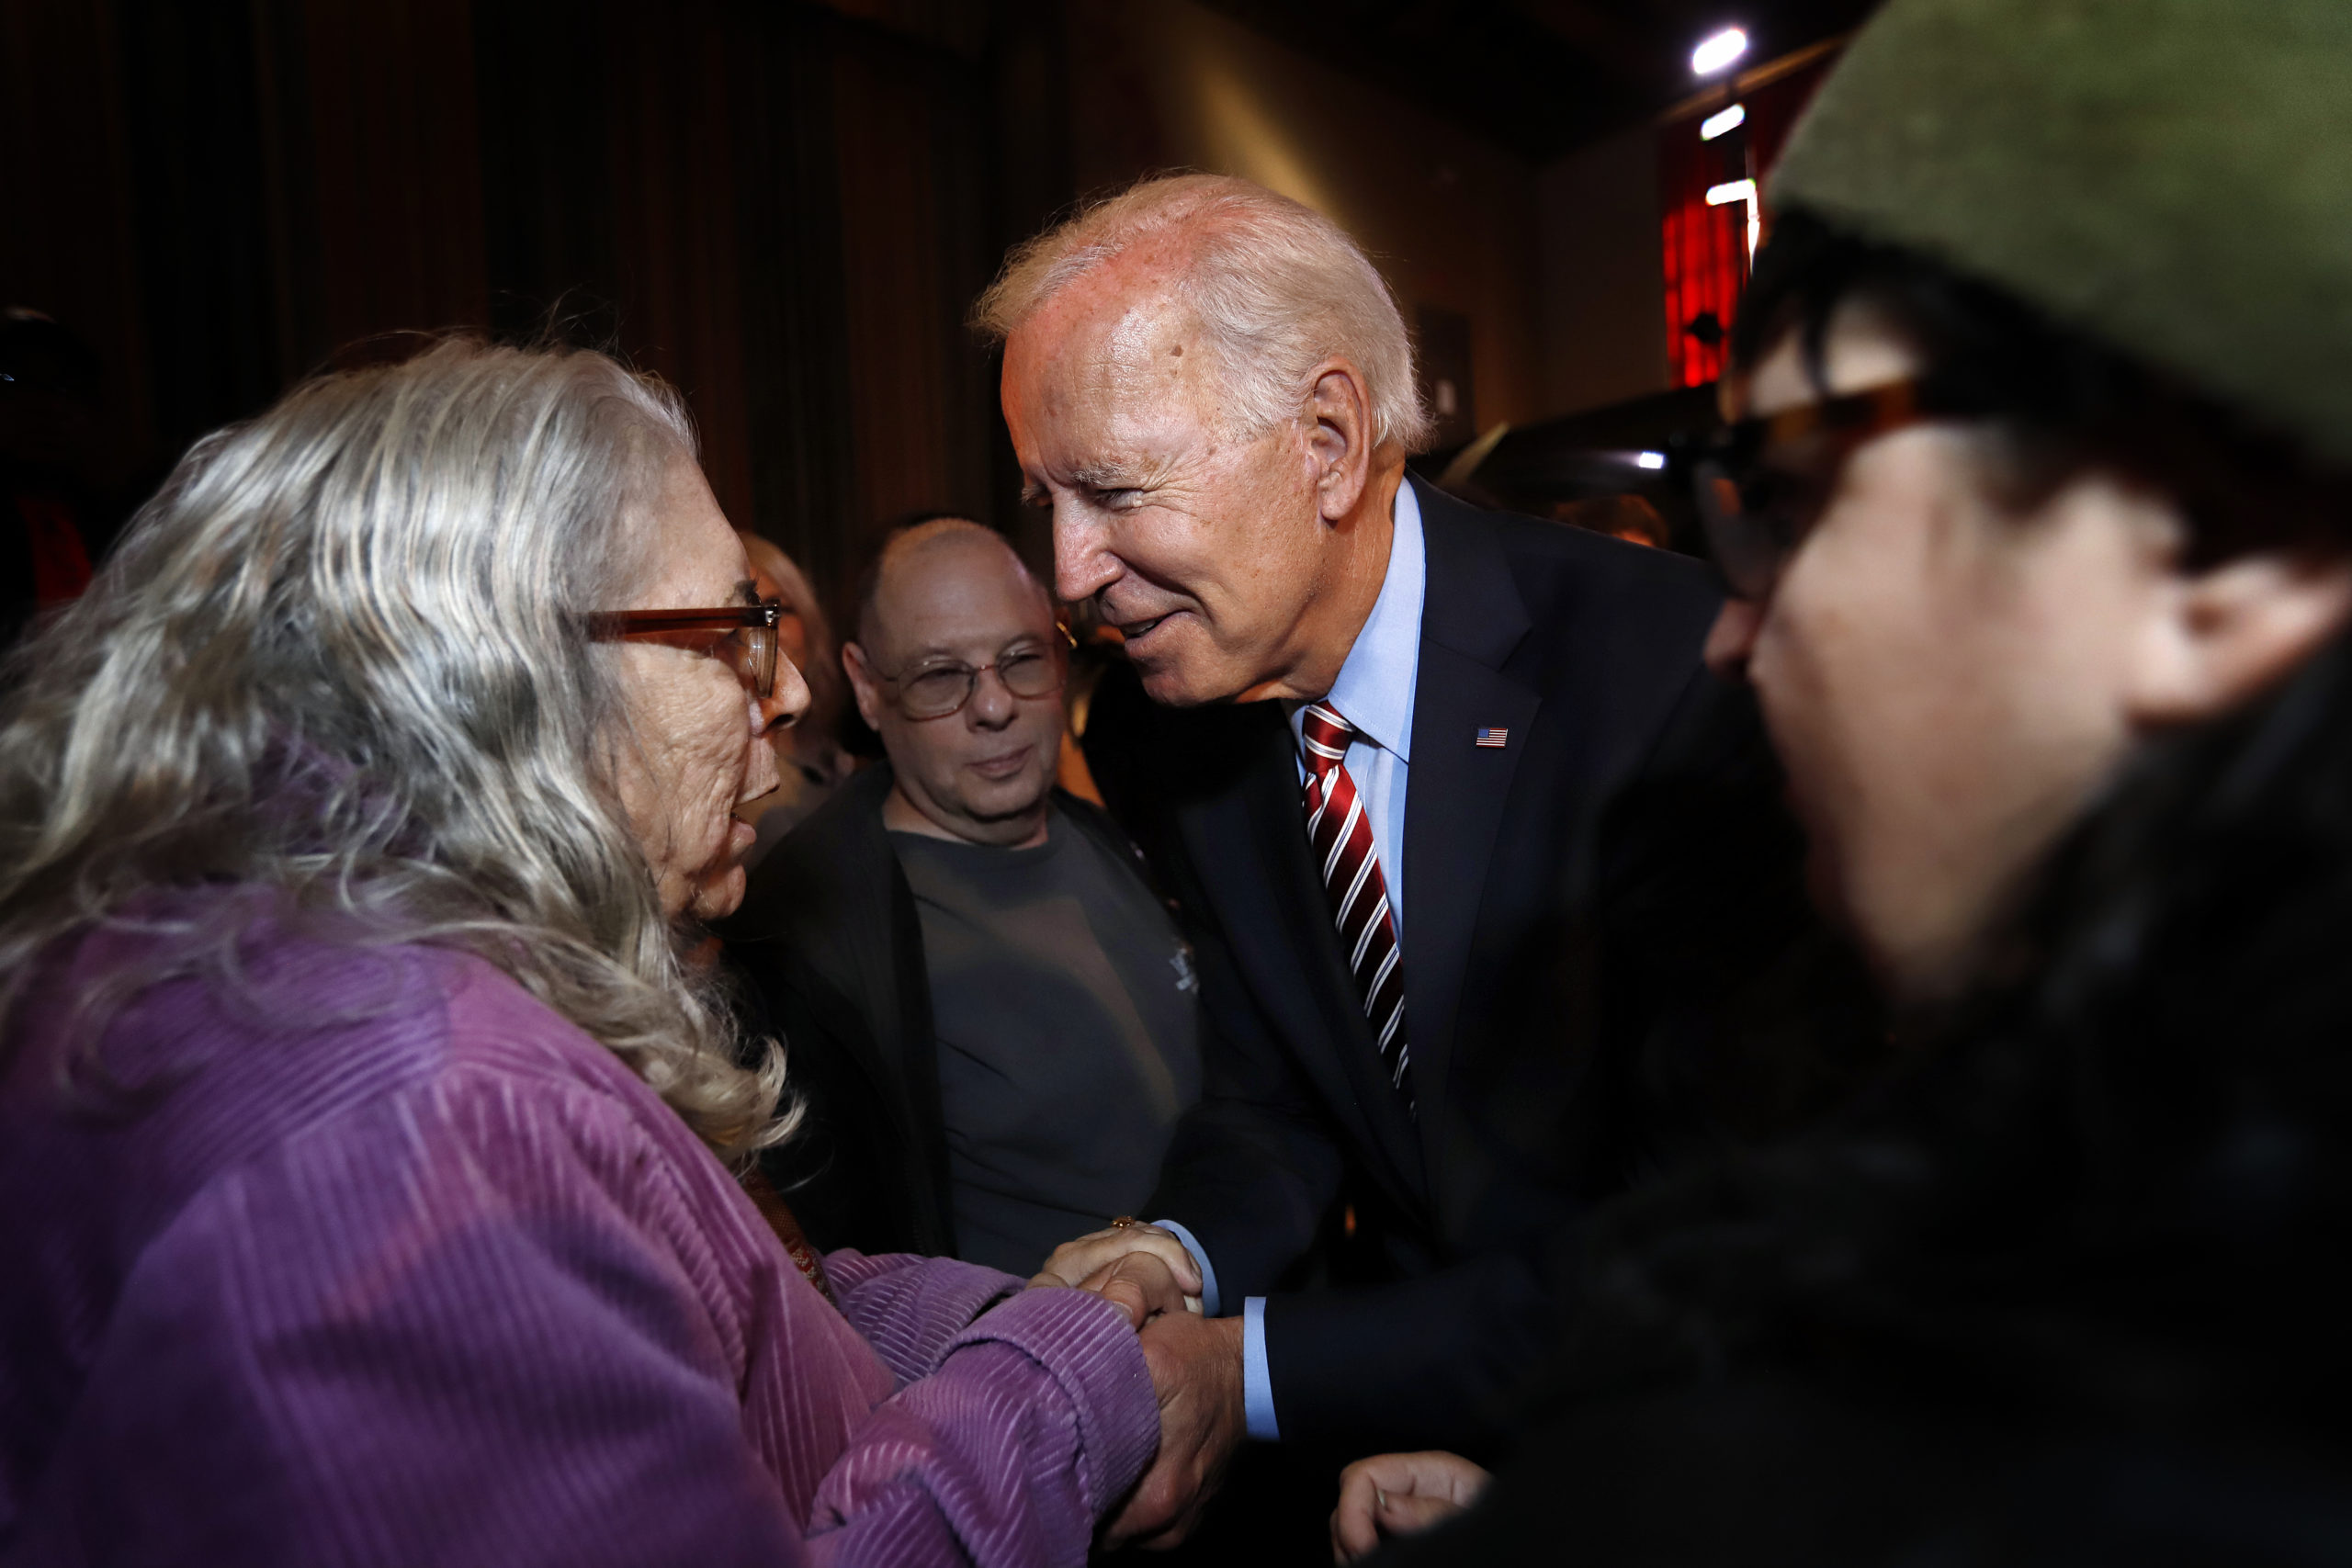 Democratic Presidential candidate Joe Biden greets a supporter after laying out his economic policy plan to help rebuild the middle class during a campaign stop at the Scranton Cultural Center on October 23, 2019 in Scranton, Pennsylvania. Biden has been a frontrunner for the candidacy but Elizabeth Warren has been gaining in recent polls.